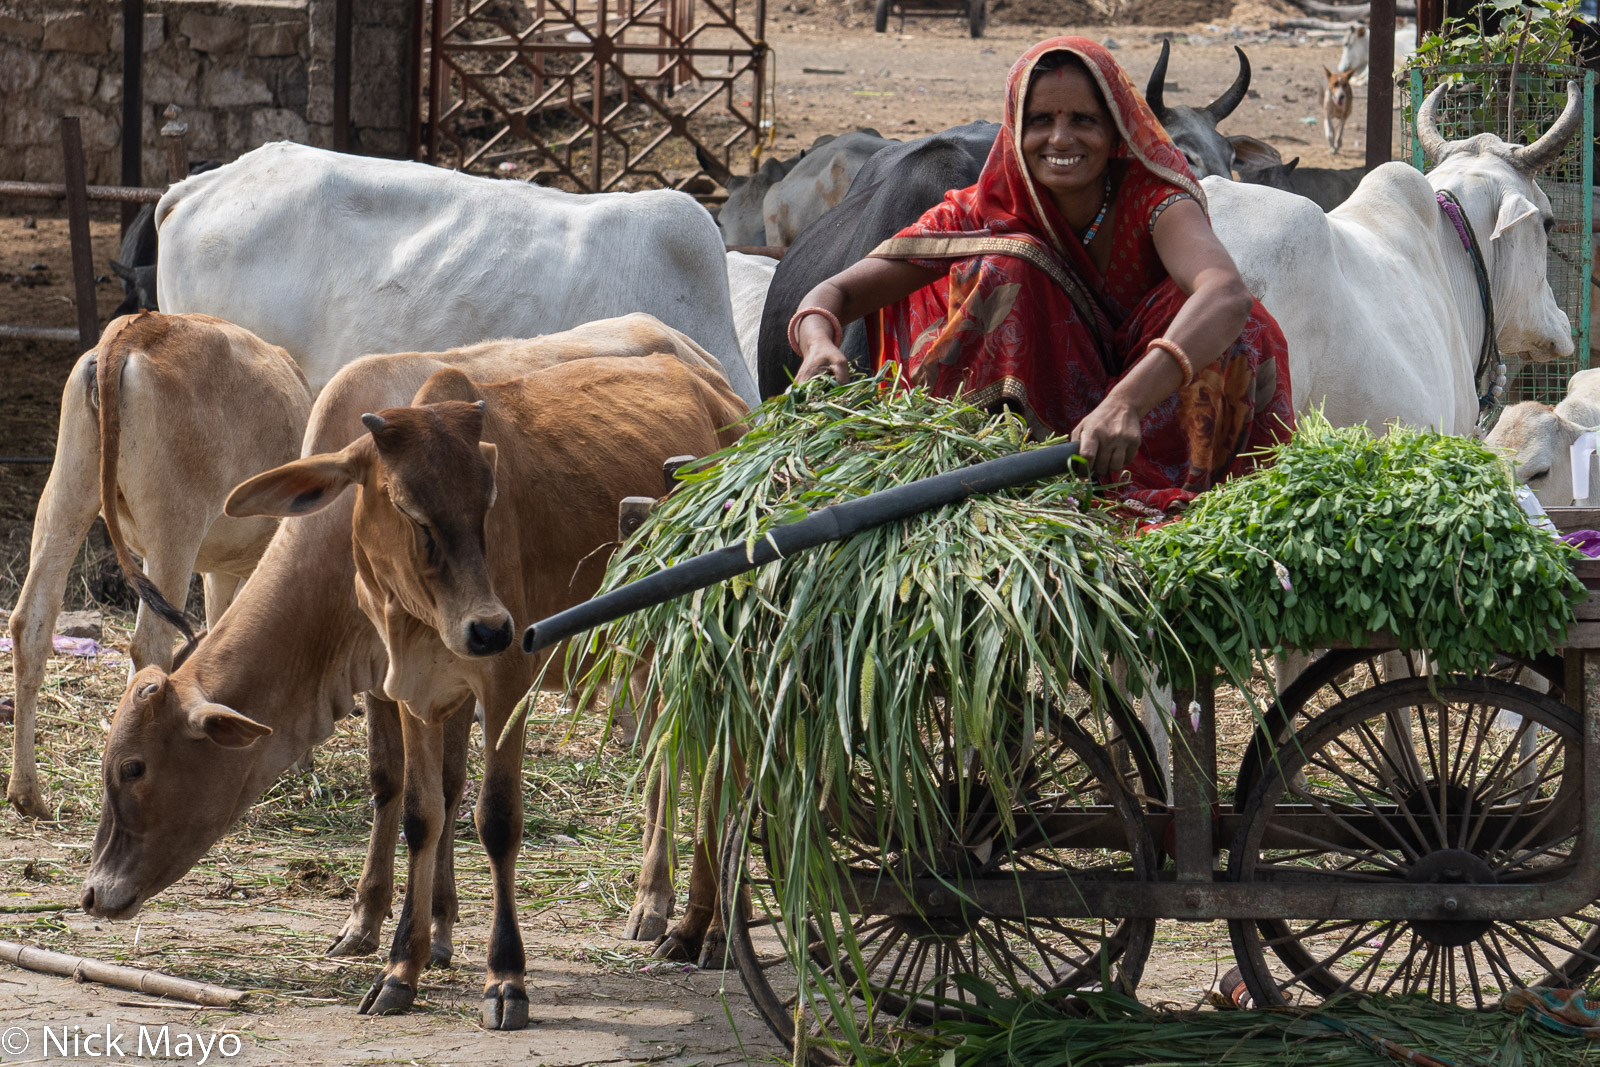 A Jhalrapatan street vendor of grass that will be bought as fodder for cows.